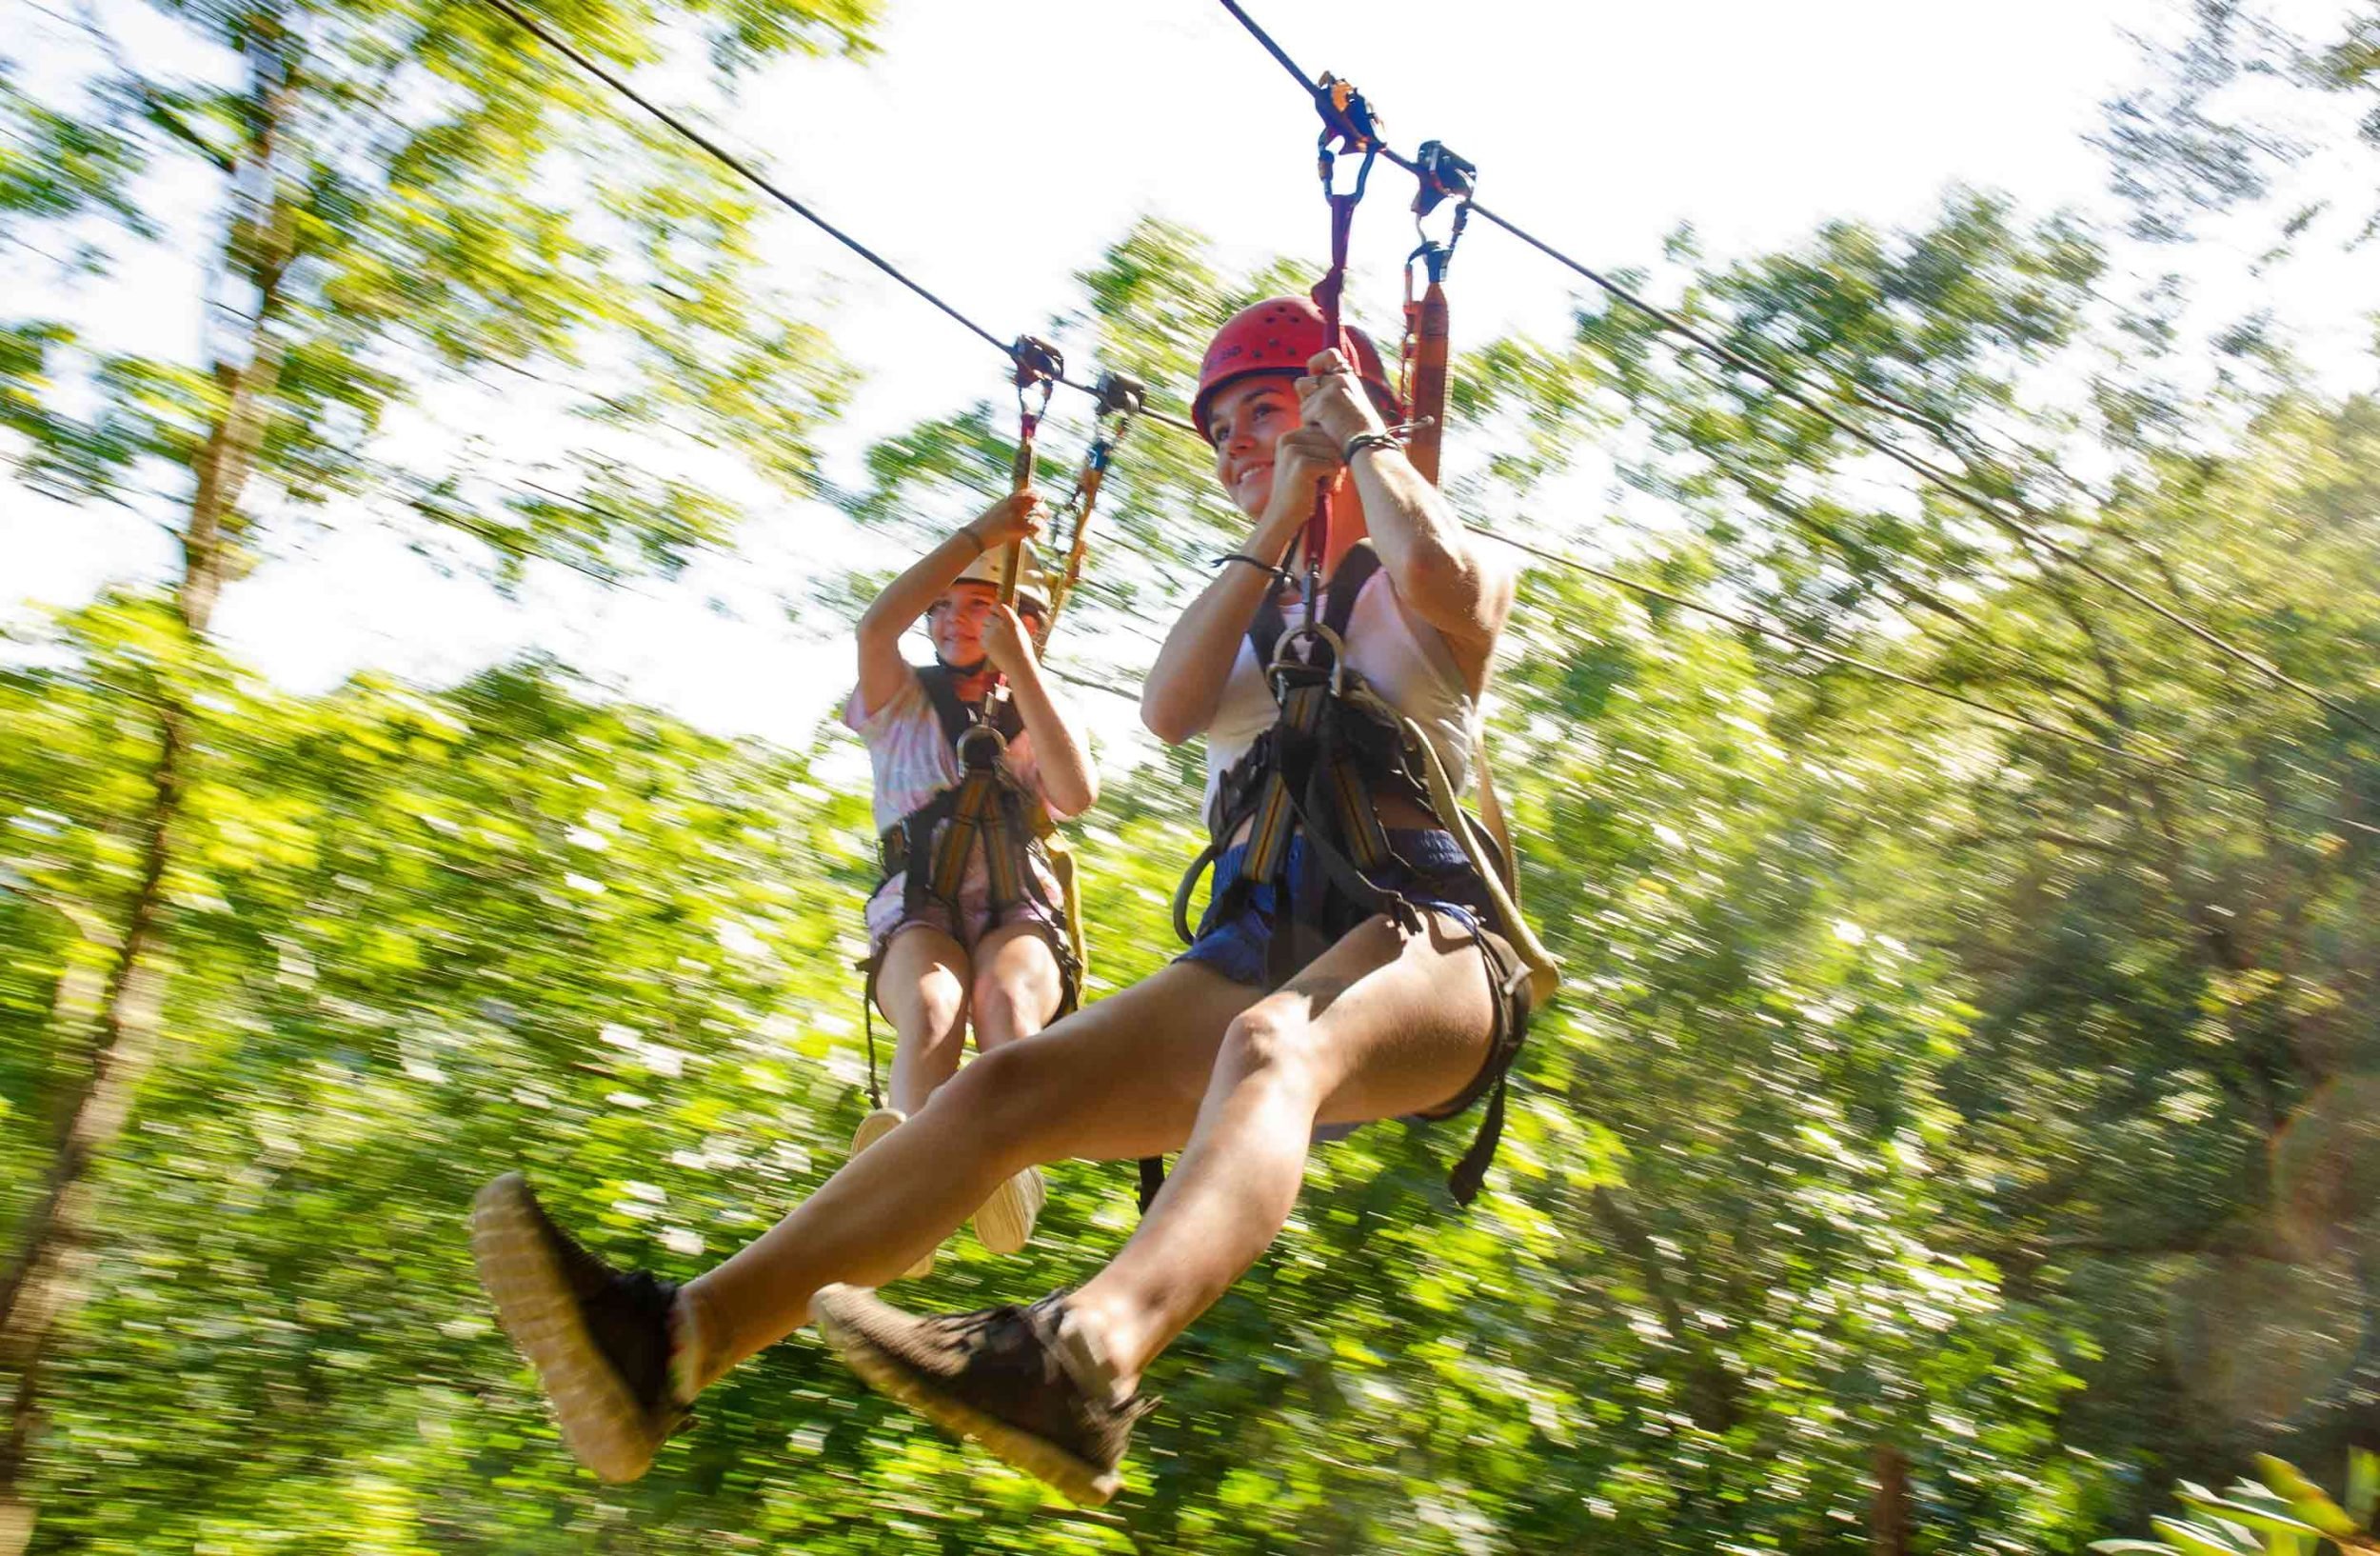 Two friends enjoy ziplining in the New River Gorge of West Virginia at ACE Adventure Resort.